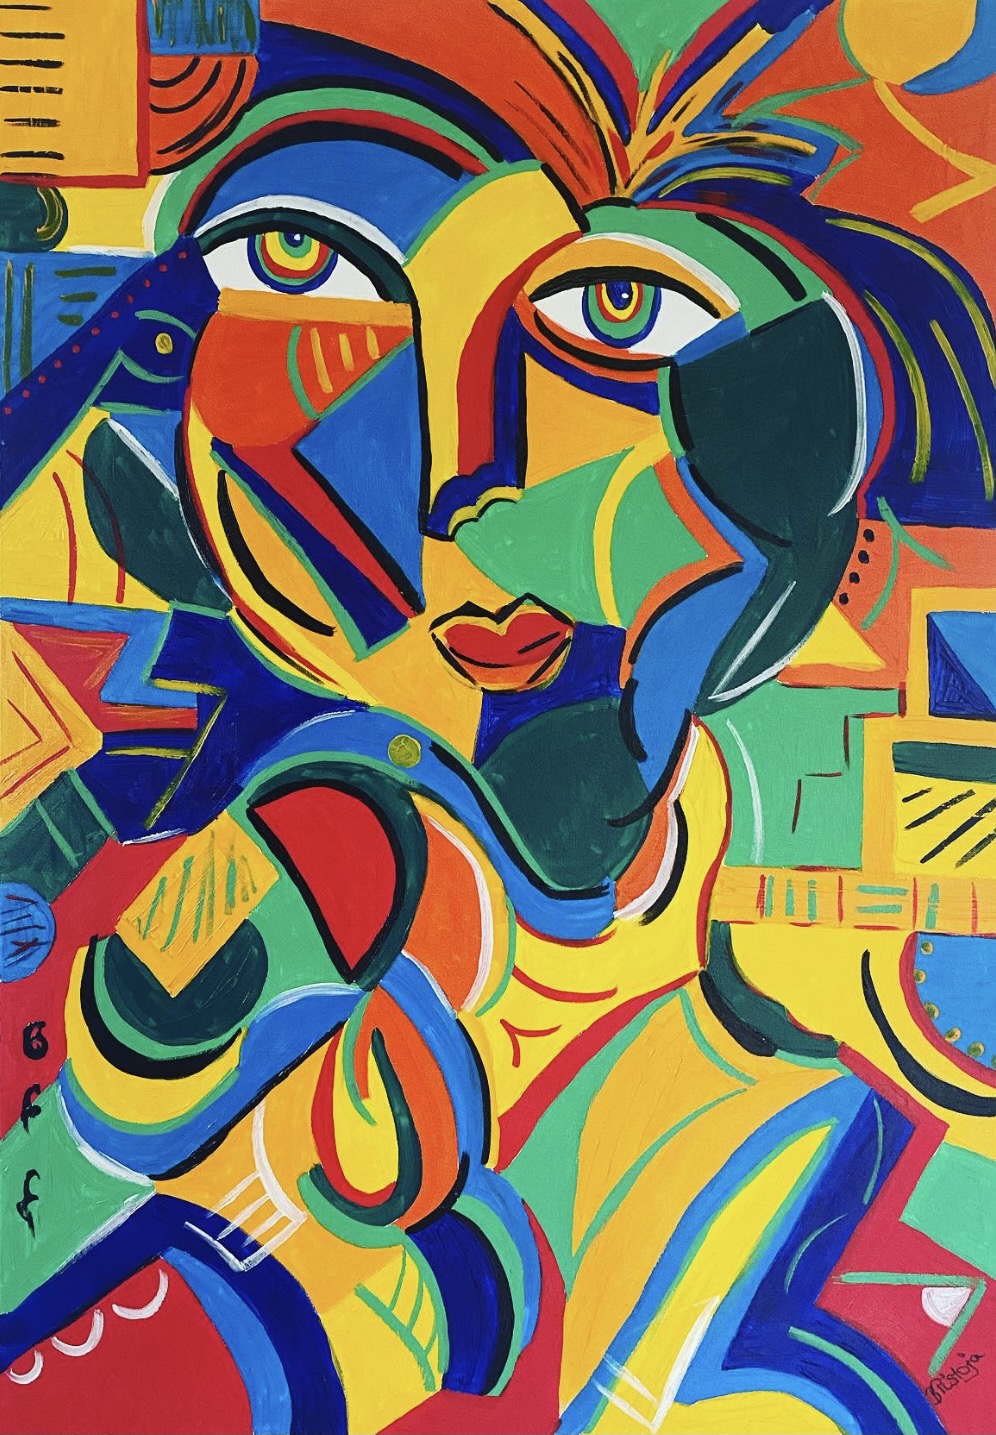 I see you - 70 cm x 100 cm